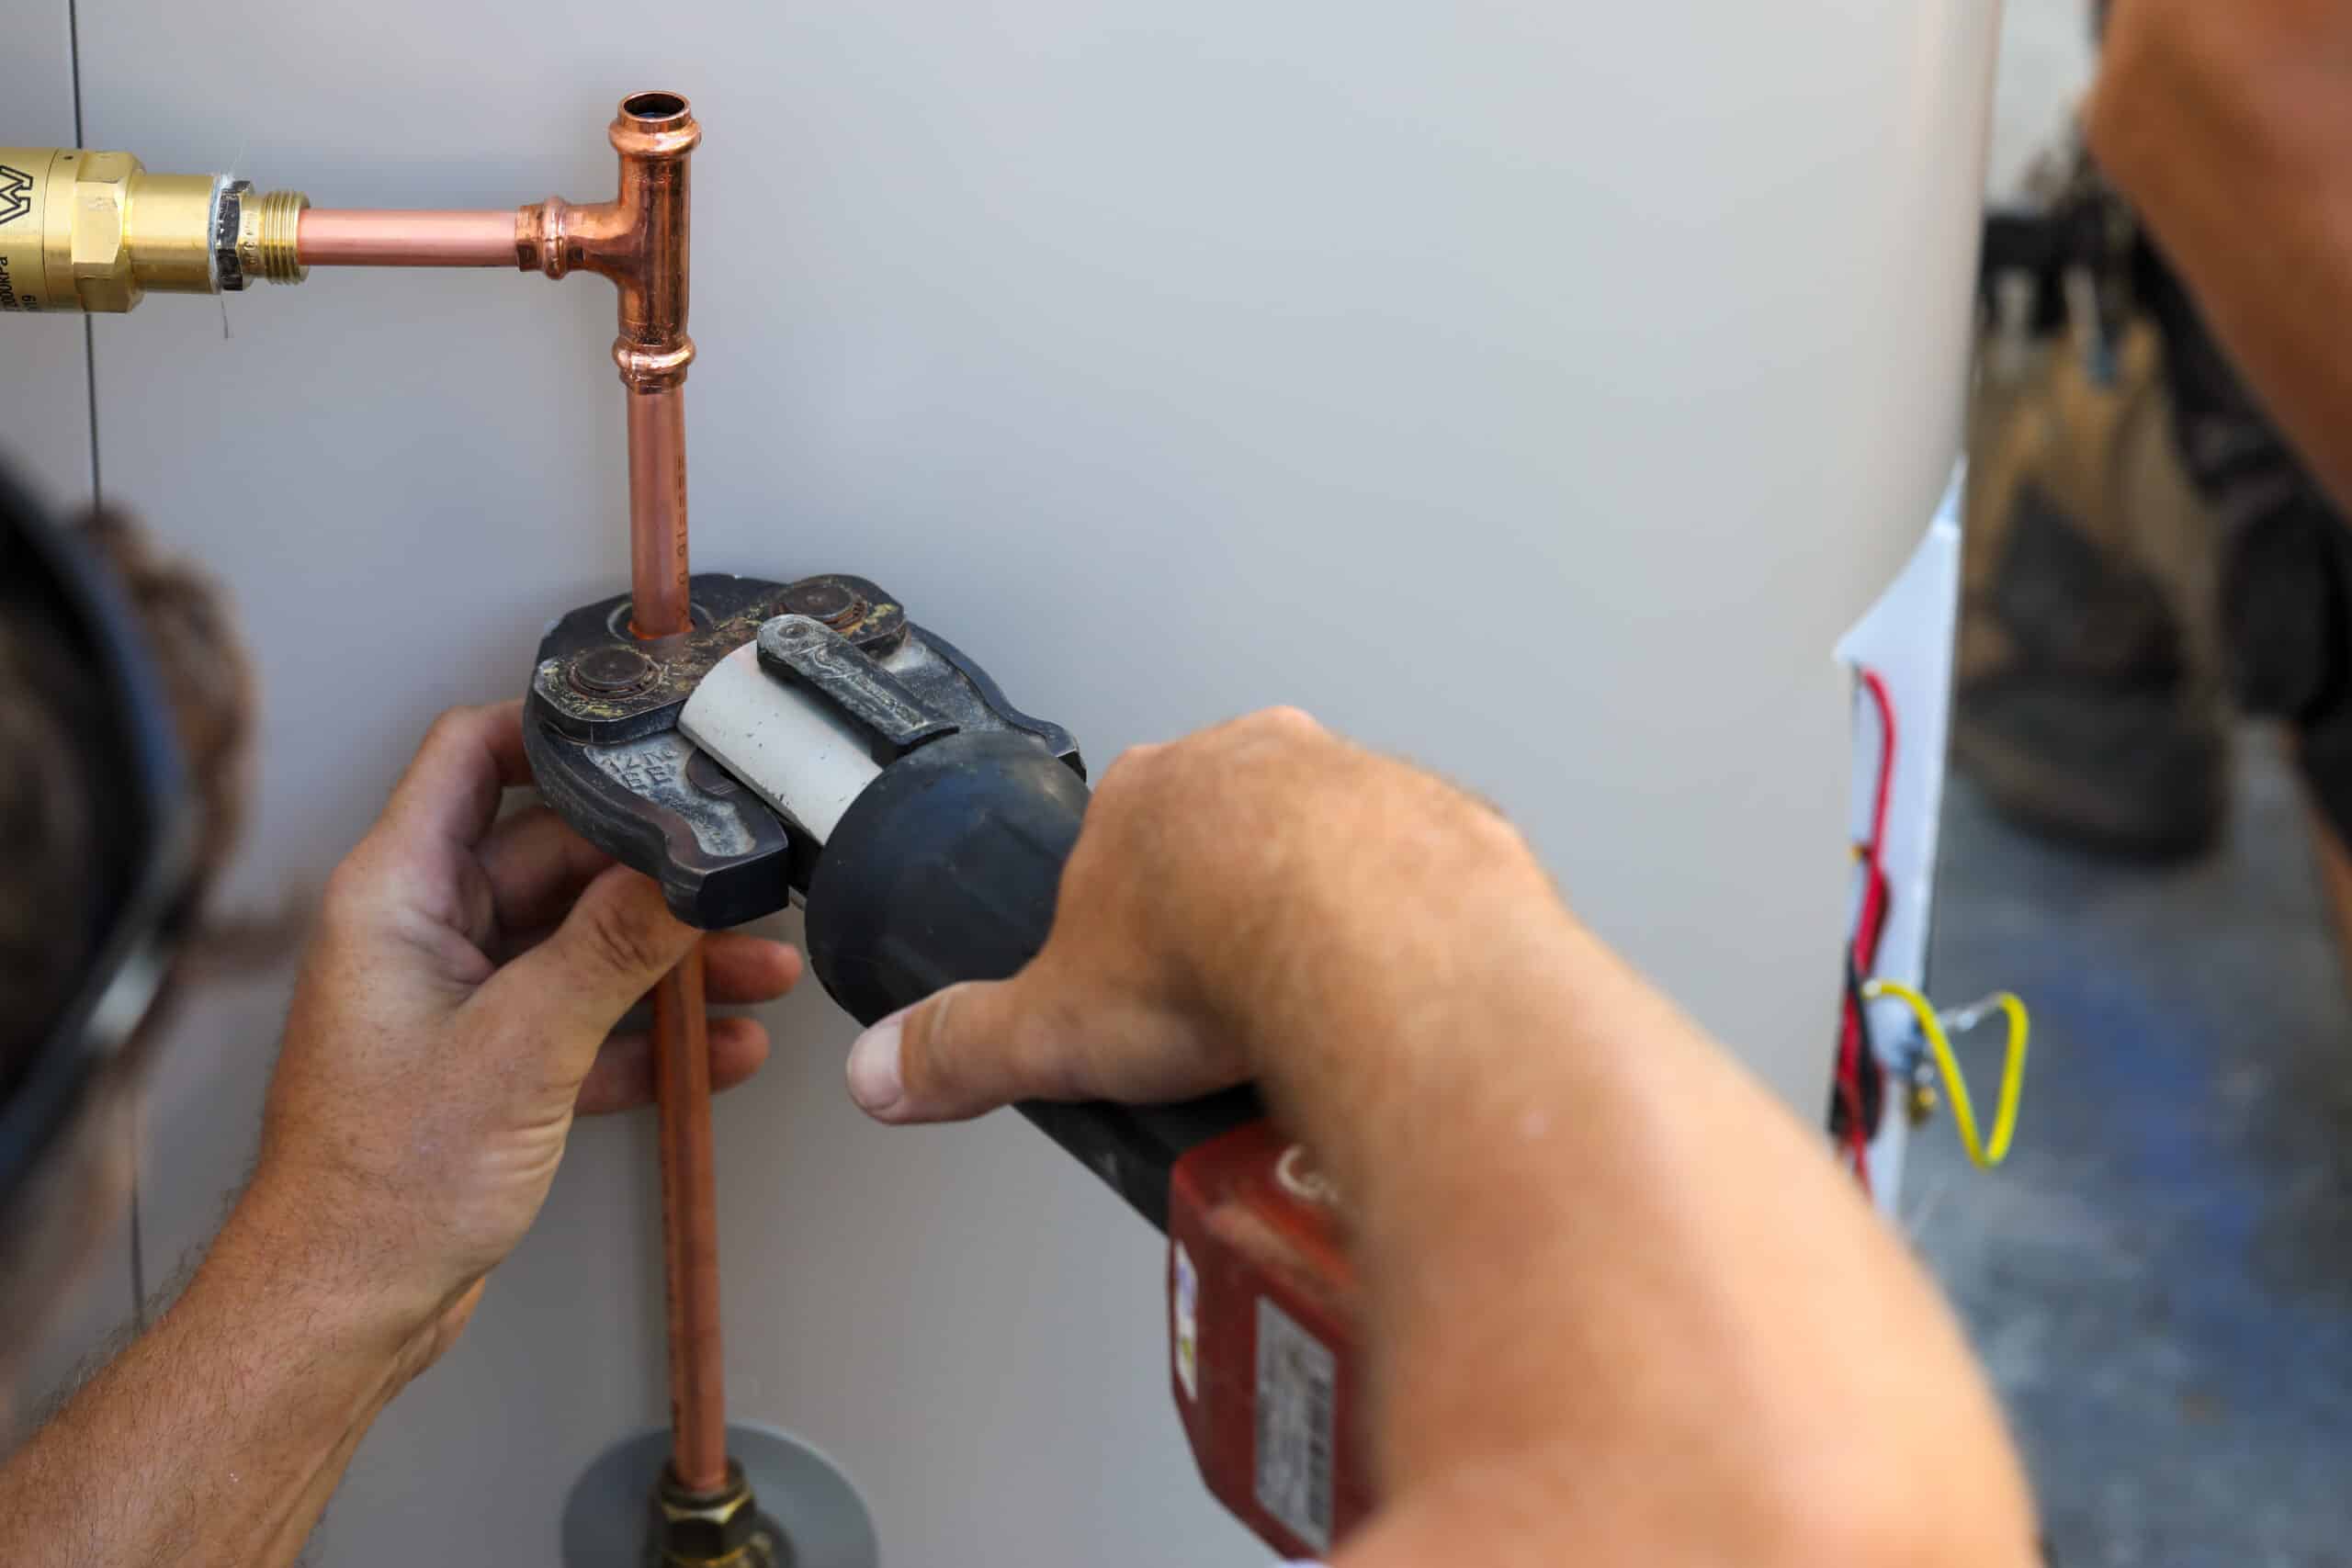 Image of a Plumber installing a hot water line